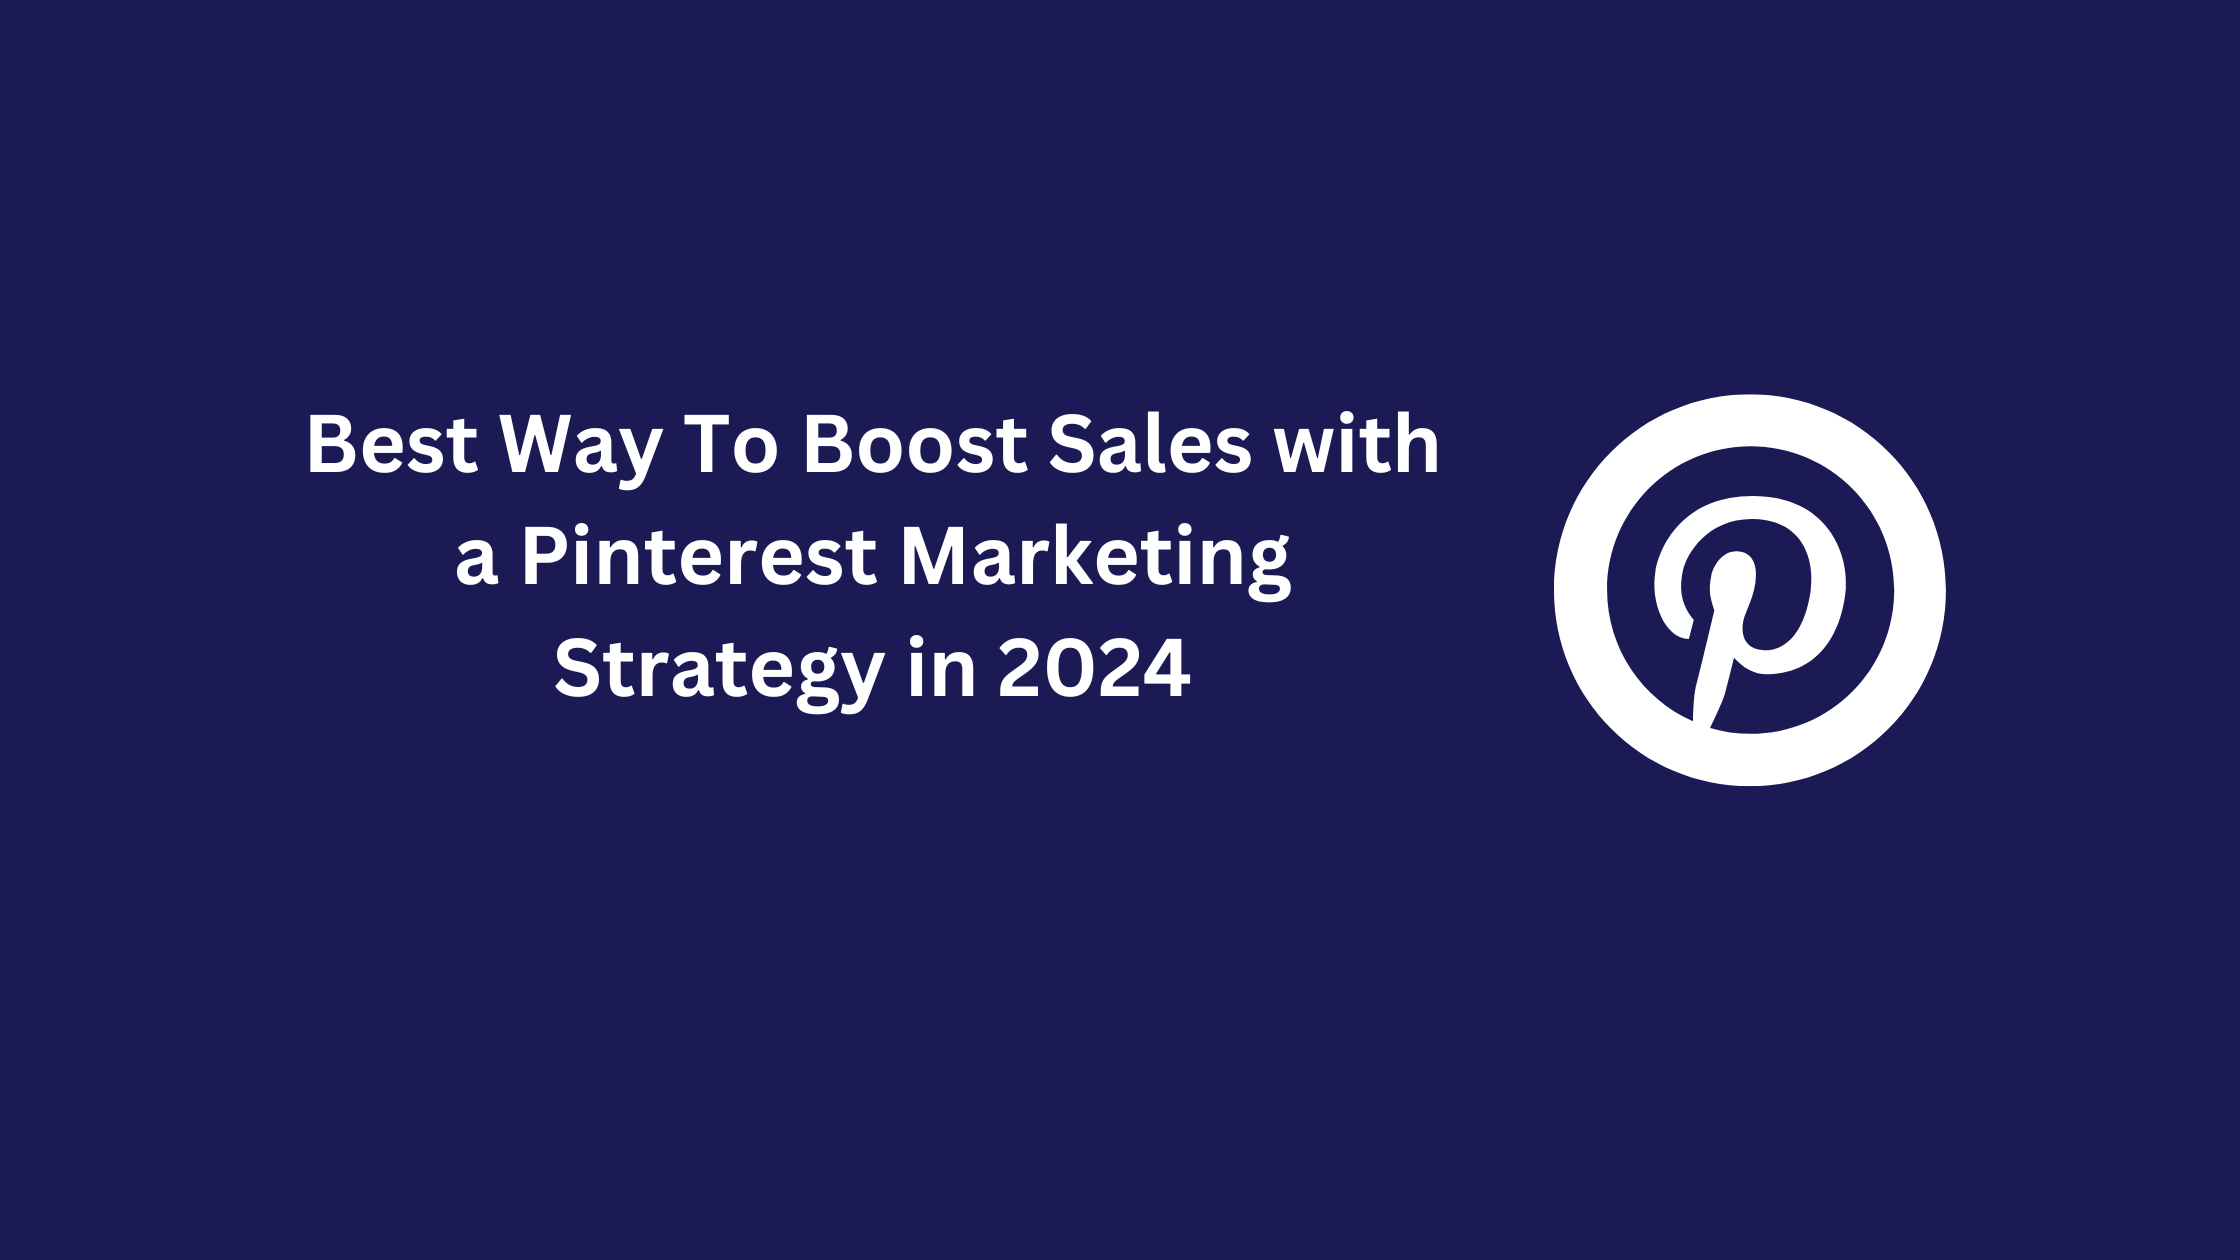 Best Way To Boost Sales with a Pinterest Marketing Strategy in 2024